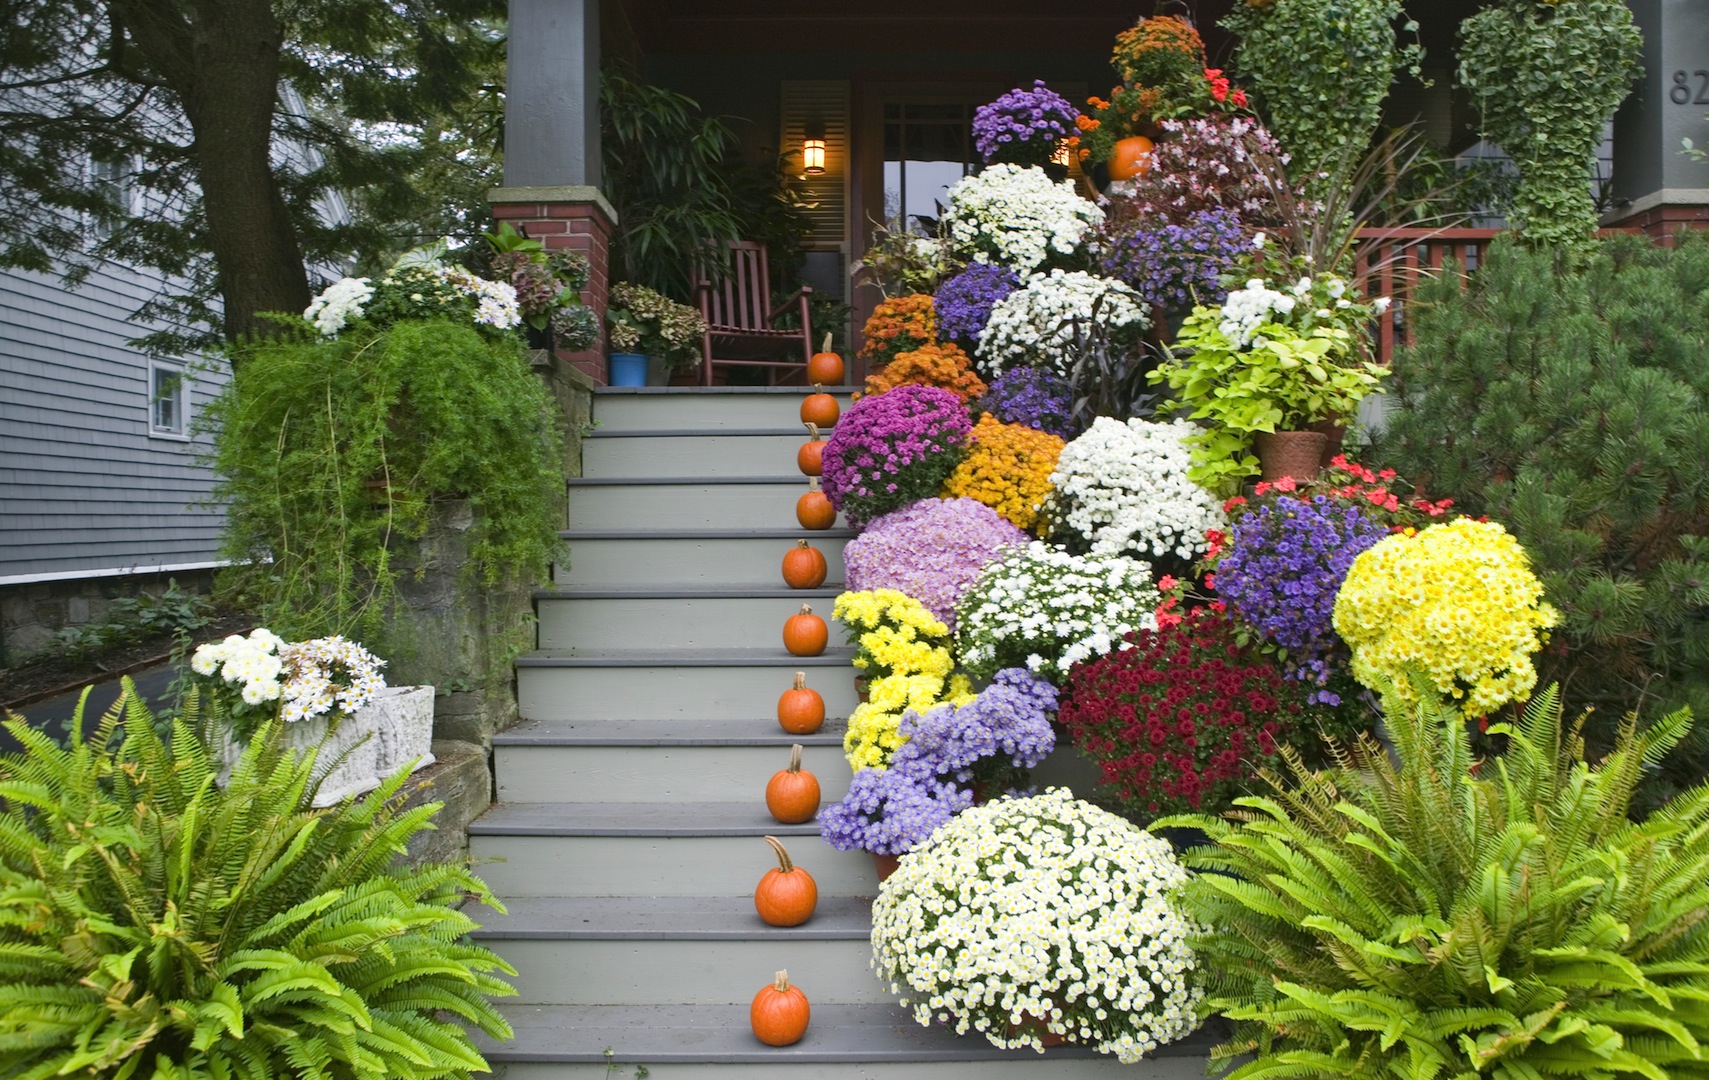 Outdoor-Stairs-Decoration-with-Flowers-Pot-11